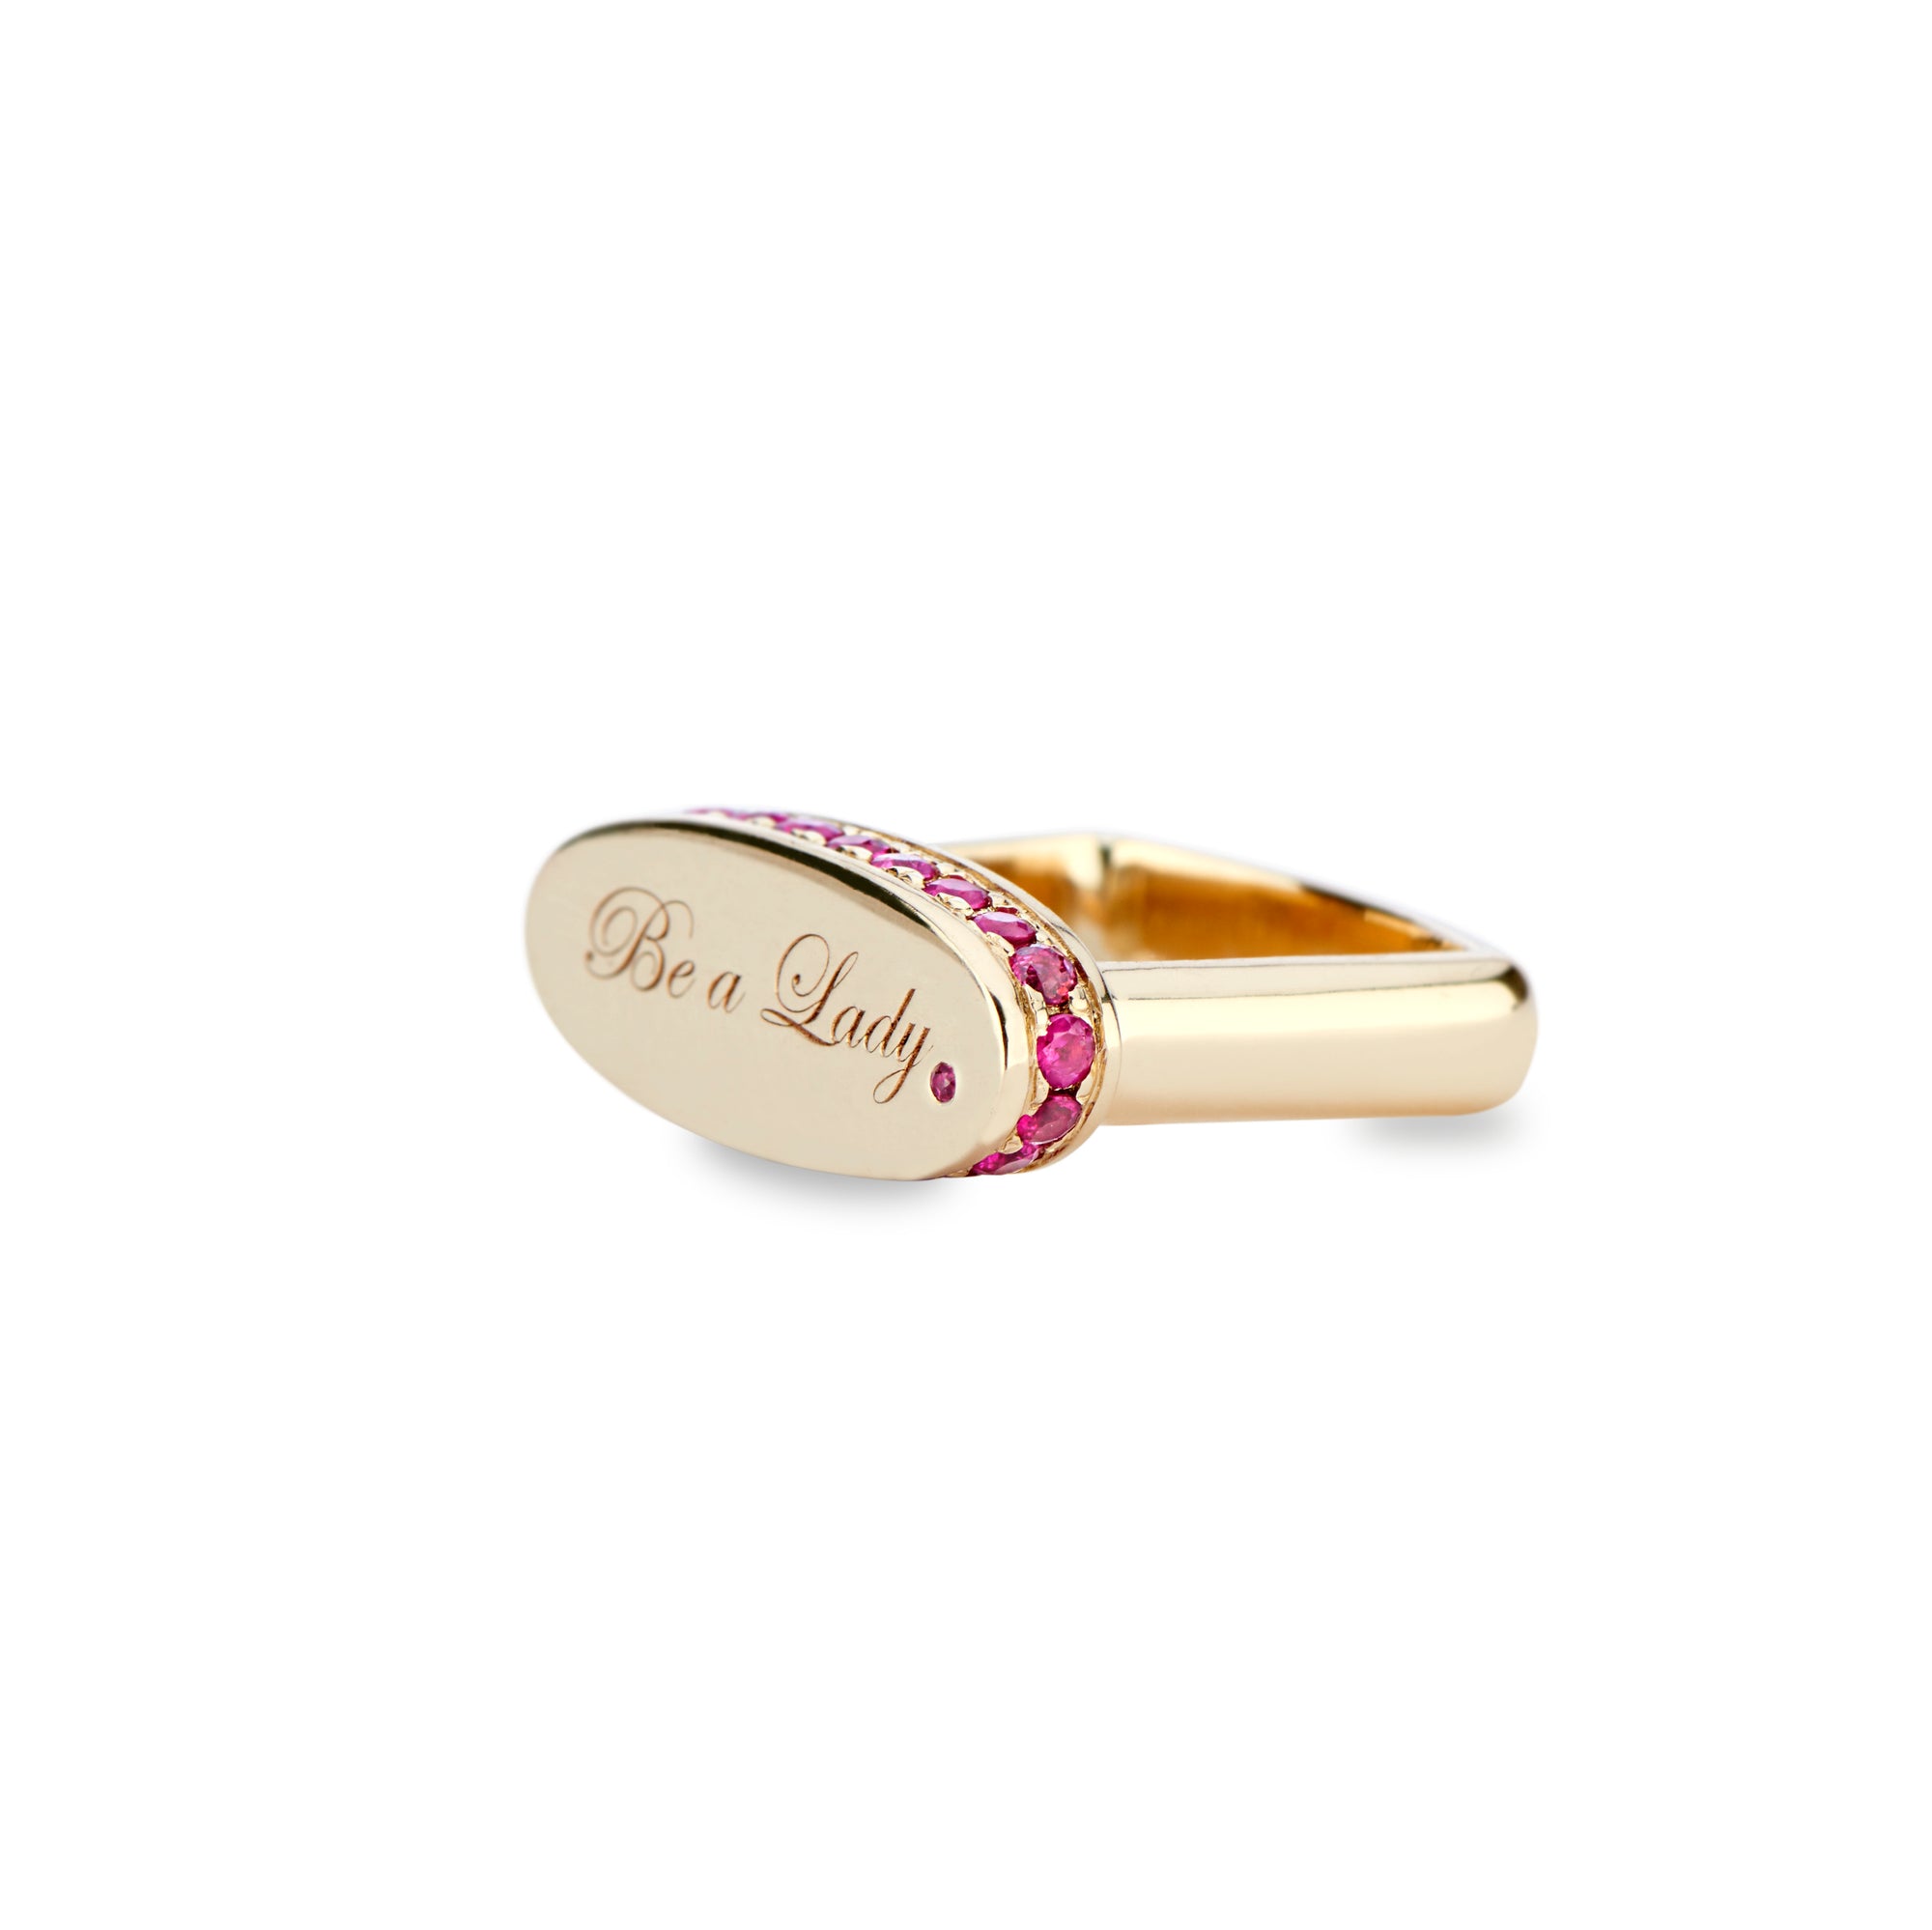 Be a Lady Signet Ring by DRU. - Talisman Collection Fine Jewelers